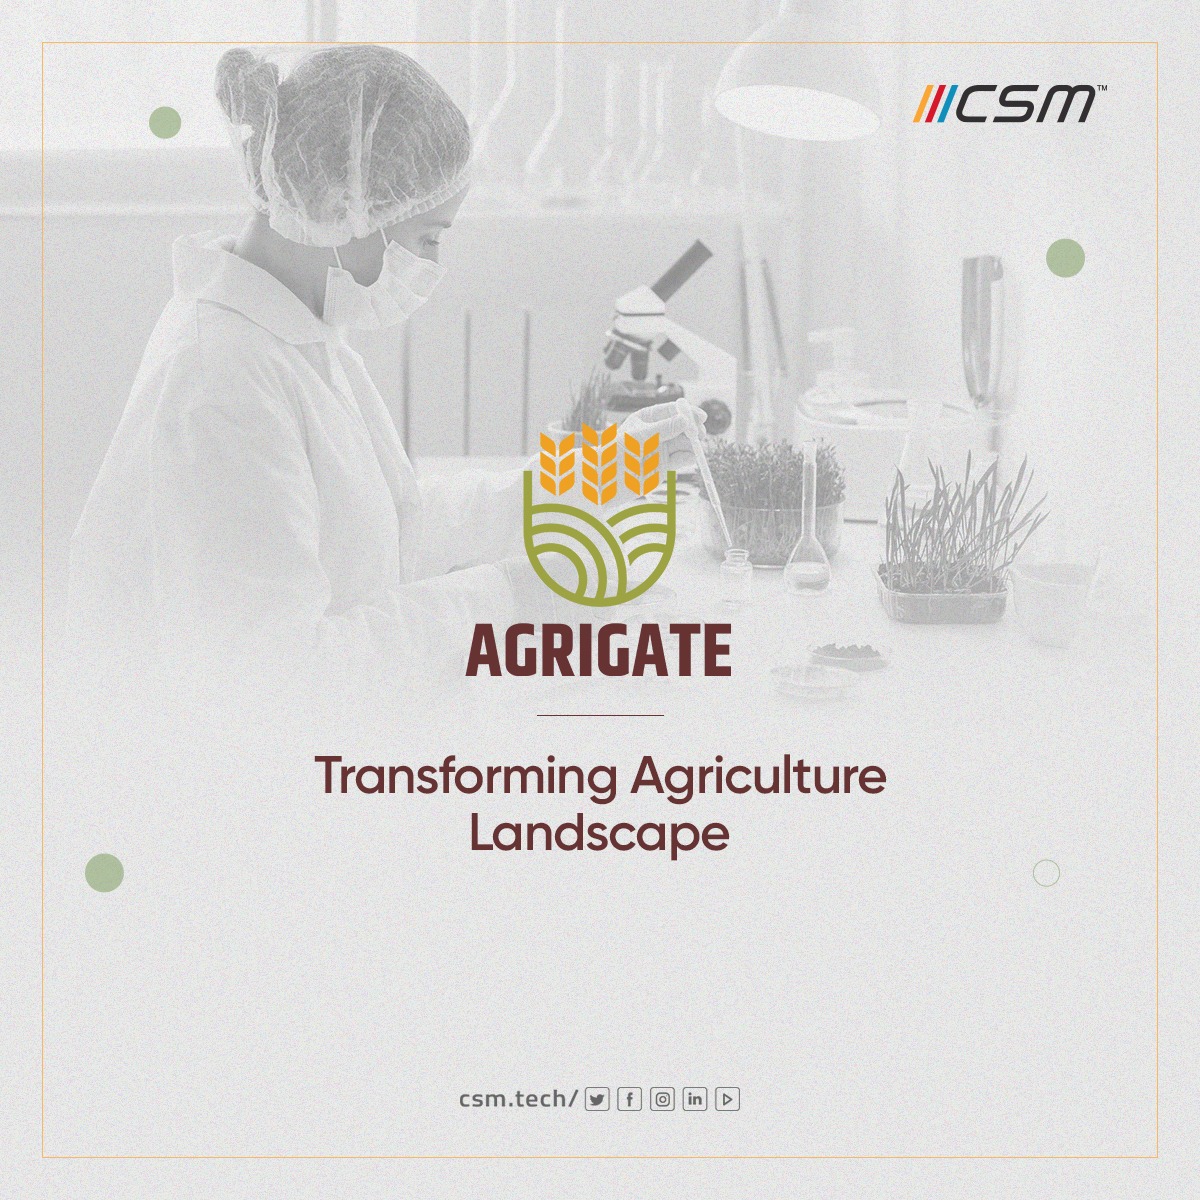 Plant pest damage costs the agricultural industry a whopping $220 billion in trade losses.
Early warning system can strengthen our defenses against pests. Know more about it here: bit.ly/csm-agrigate-e…
#CSMPlatforms #EarlyWarning #Agritech #PestMonitoring